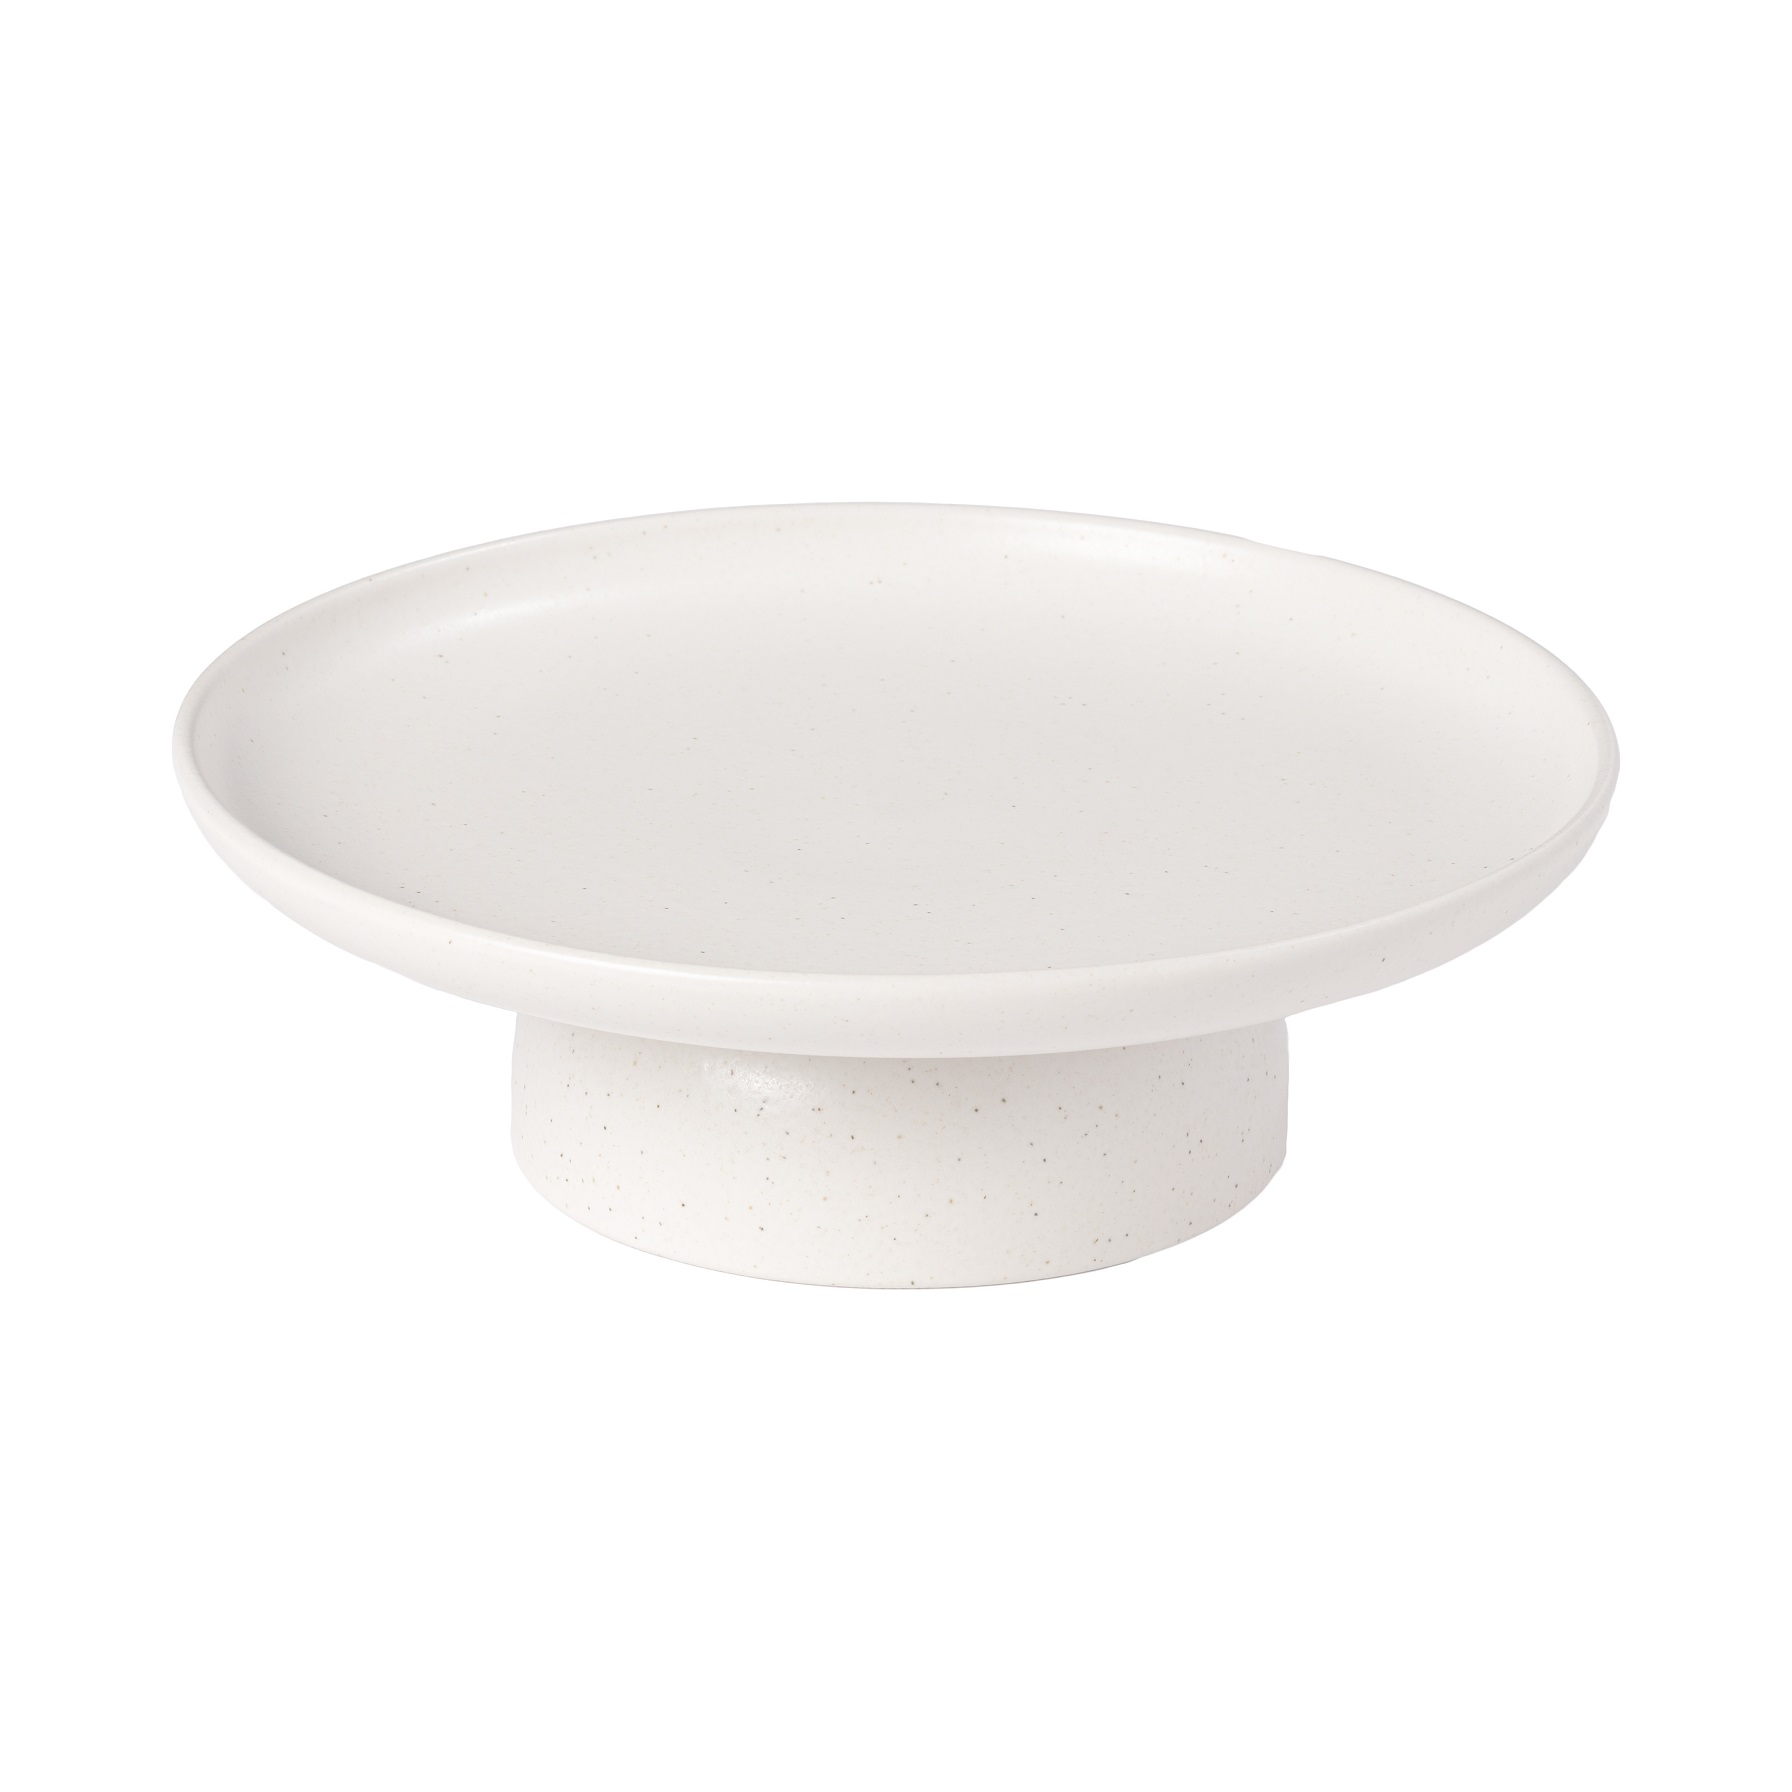 Pacifica Salt Footed Plate 27cm Gift